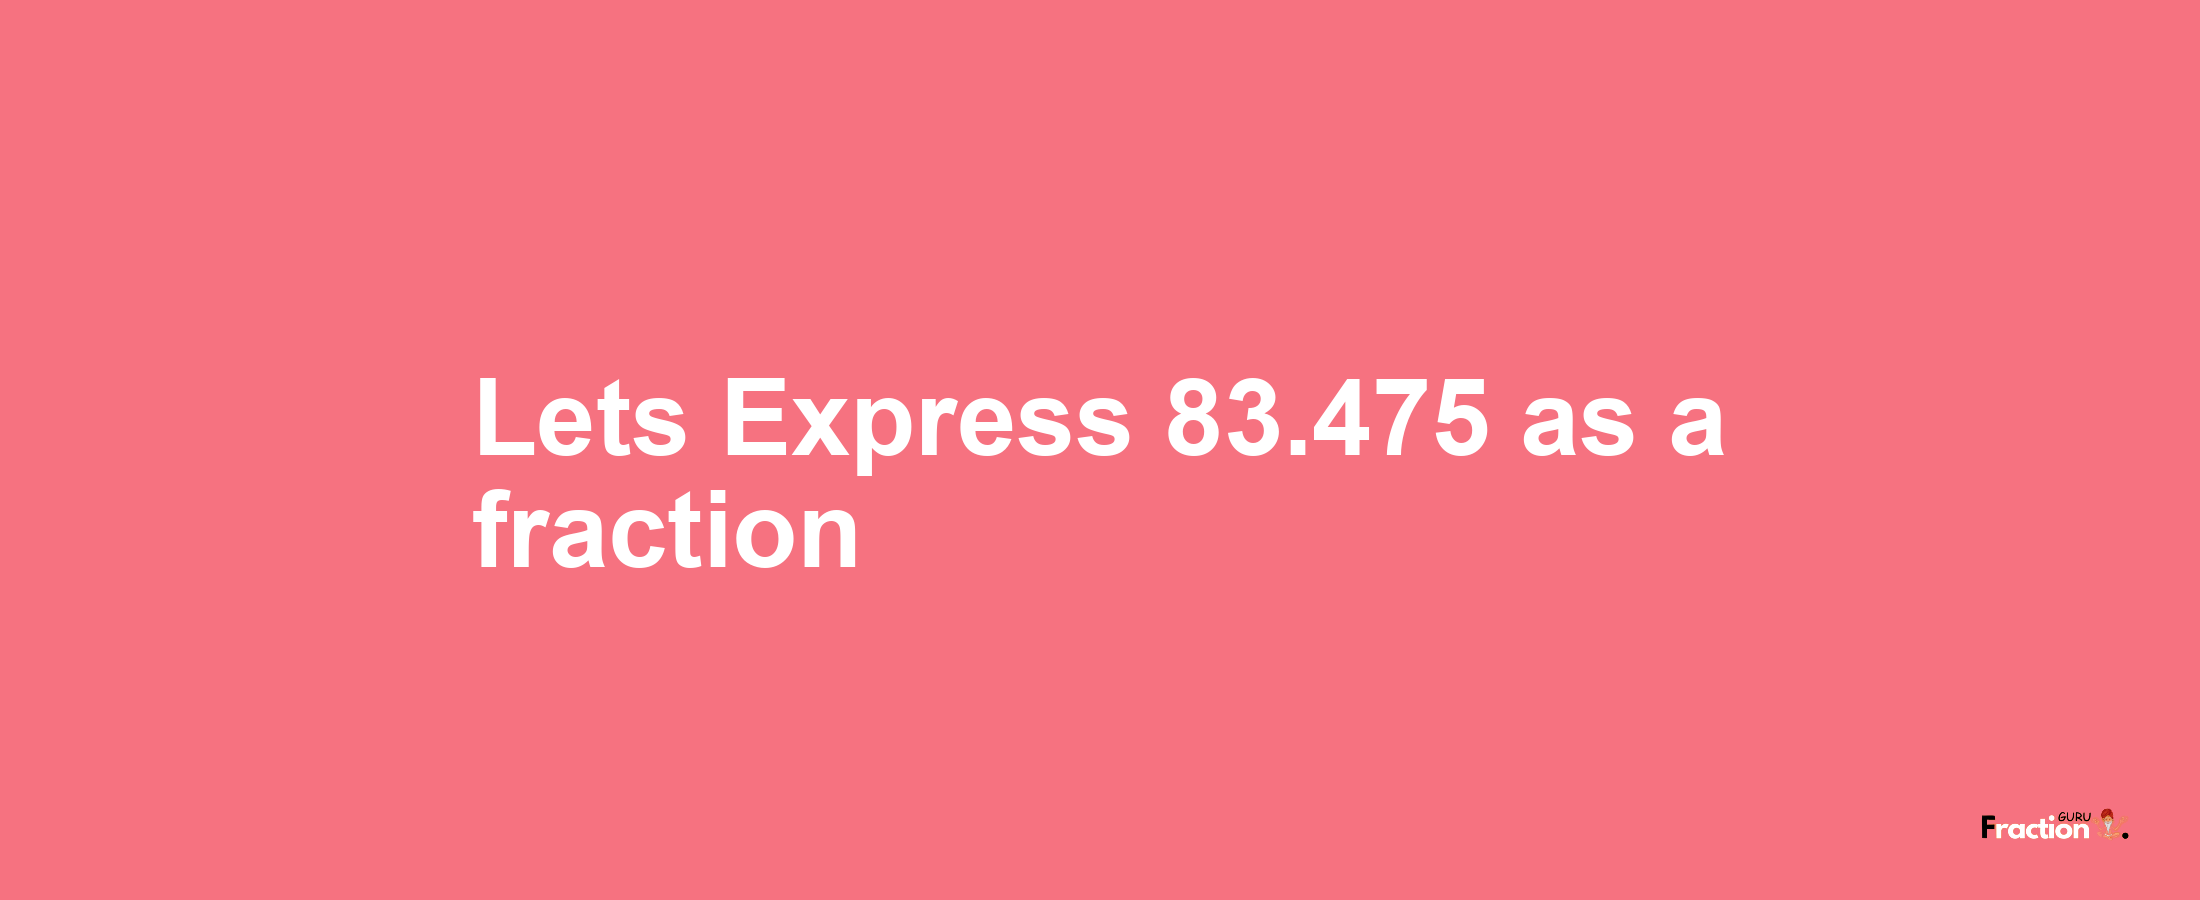 Lets Express 83.475 as afraction